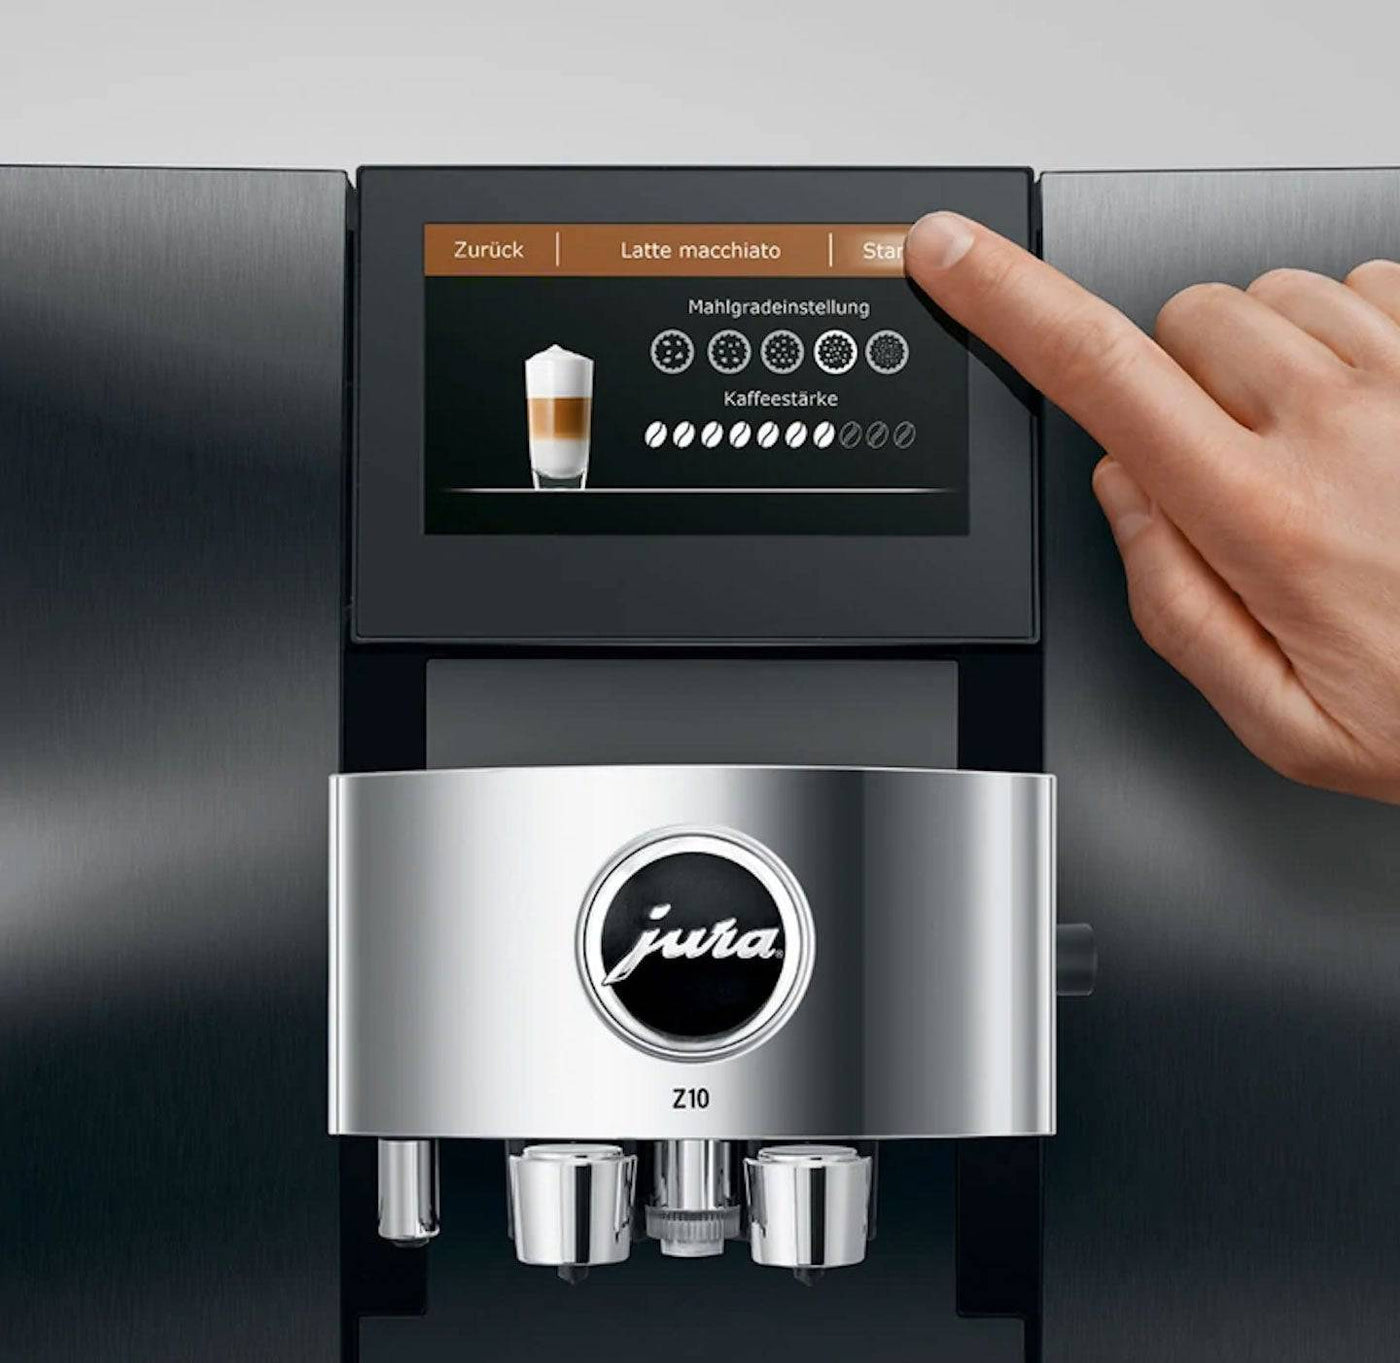 Jura Z10 Fully Automatic Bean-To-Cup Machine for Hot and Cold Coffee, Diamond Black - Kitchen Universe